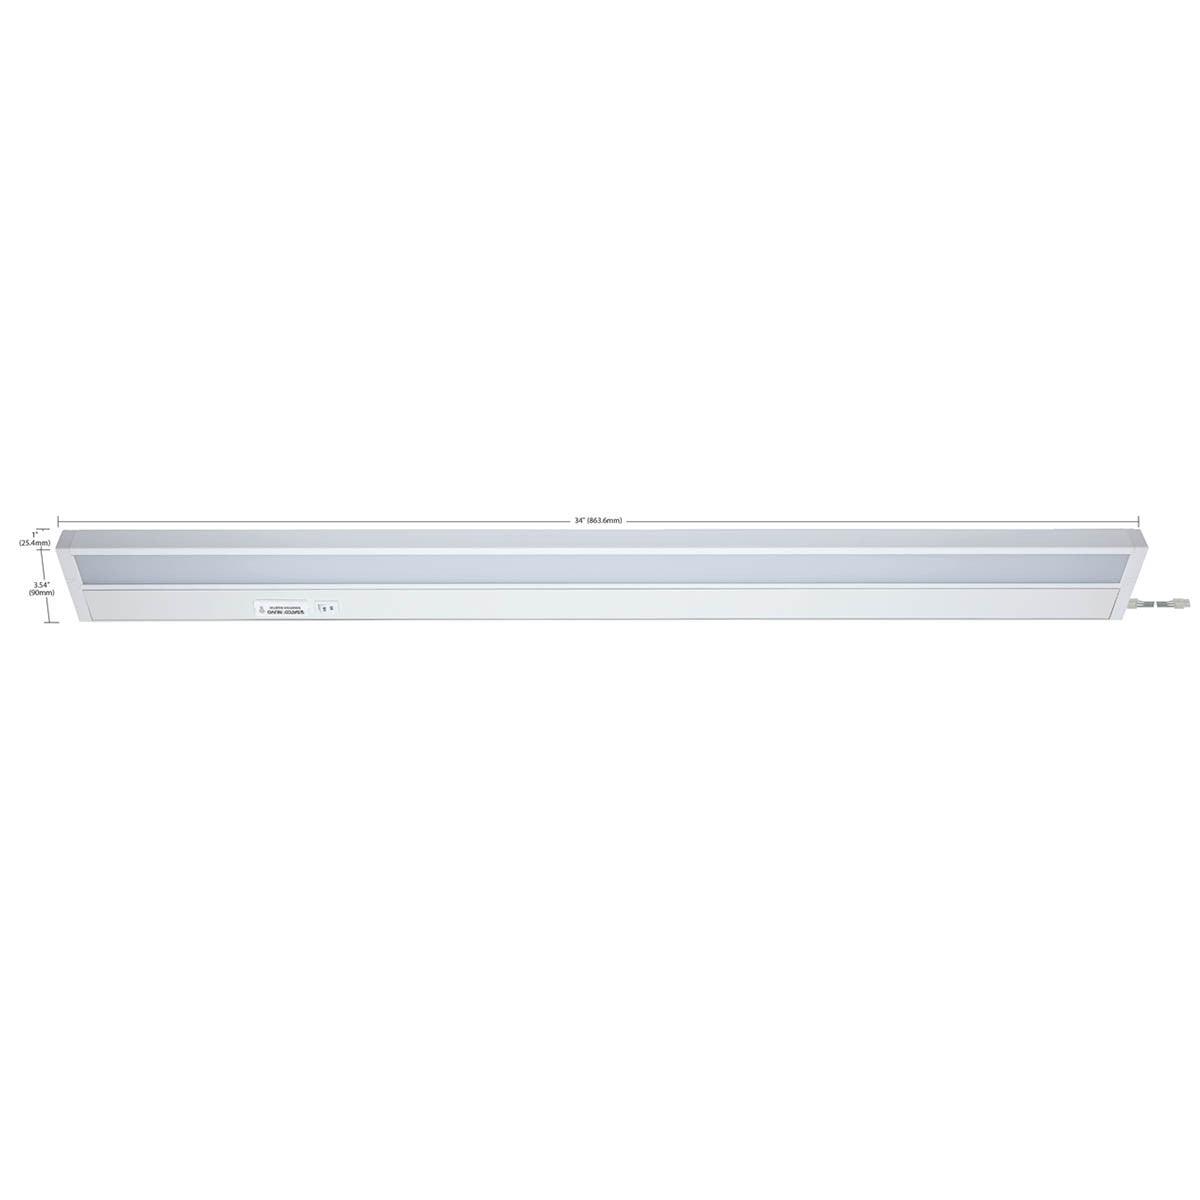 Starfish 34 Inch Smart Under Cabinet Light, 1420 Lumens, RGB Color Changing and Tunable White 2700K to 5000K, 120V - Bees Lighting